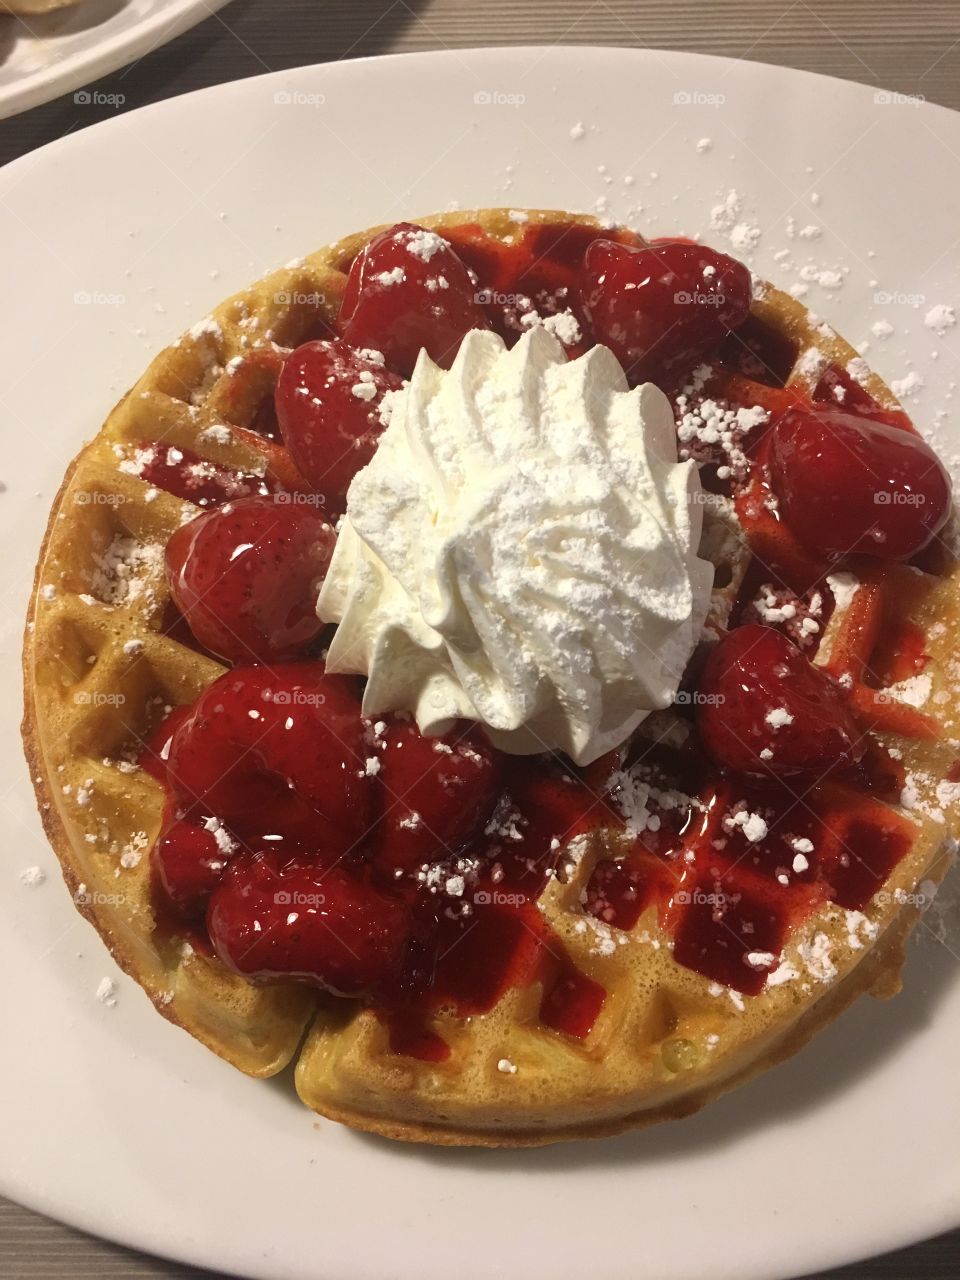 Strawberry waffle from Perkins